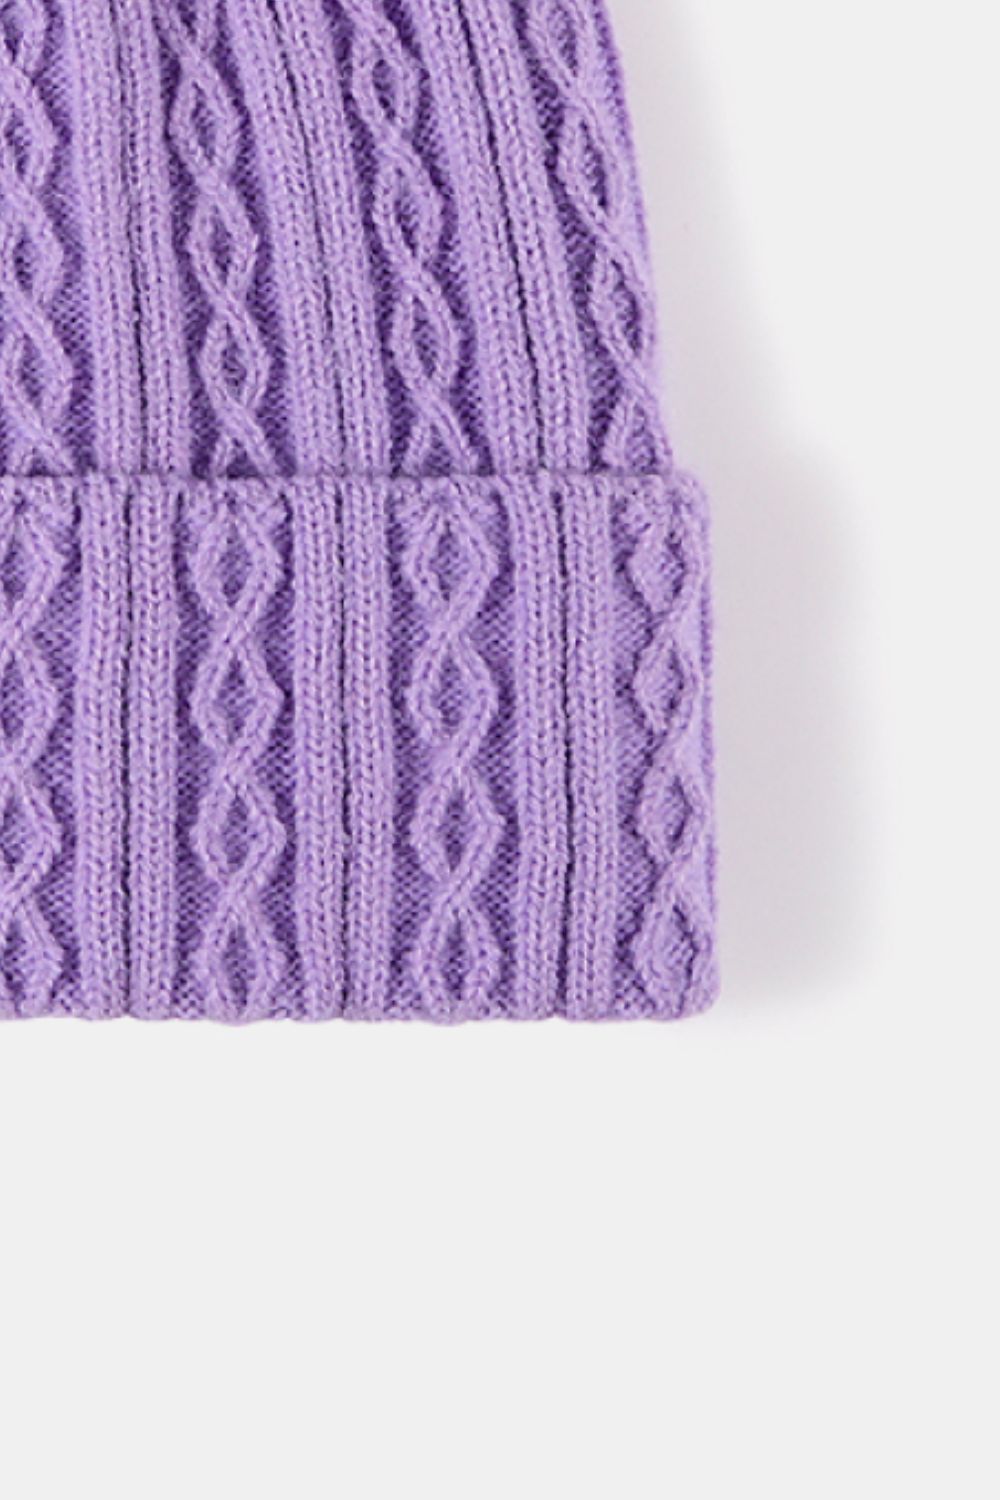 Lavender Mixed Knit Cuff Beanie Sentient Beauty Fashions *Accessories